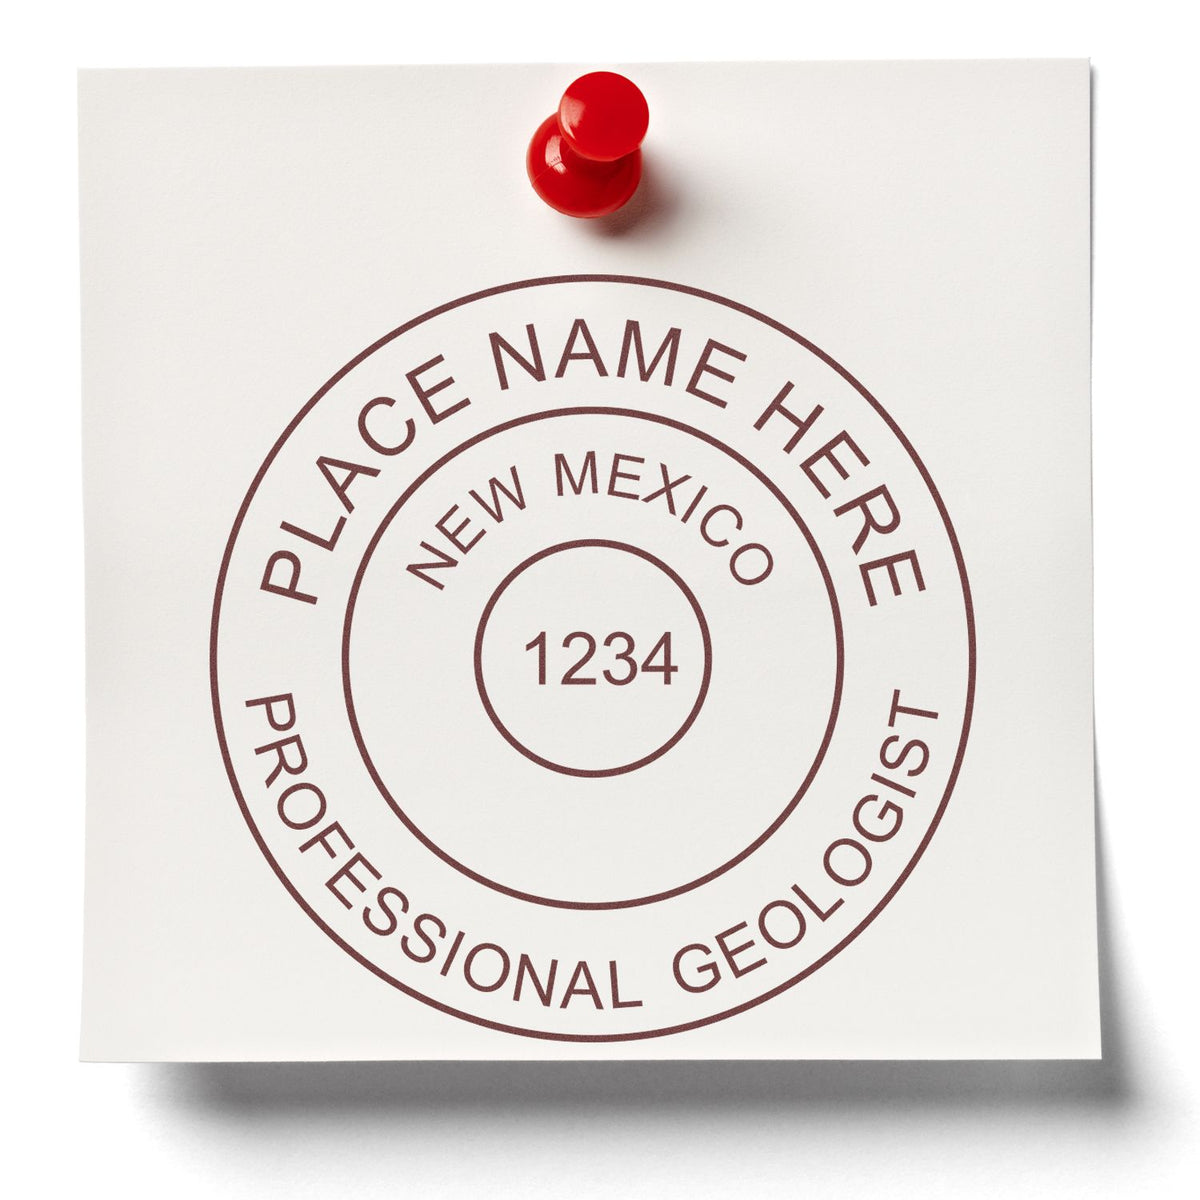 The Self-Inking New Mexico Geologist Stamp stamp impression comes to life with a crisp, detailed image stamped on paper - showcasing true professional quality.